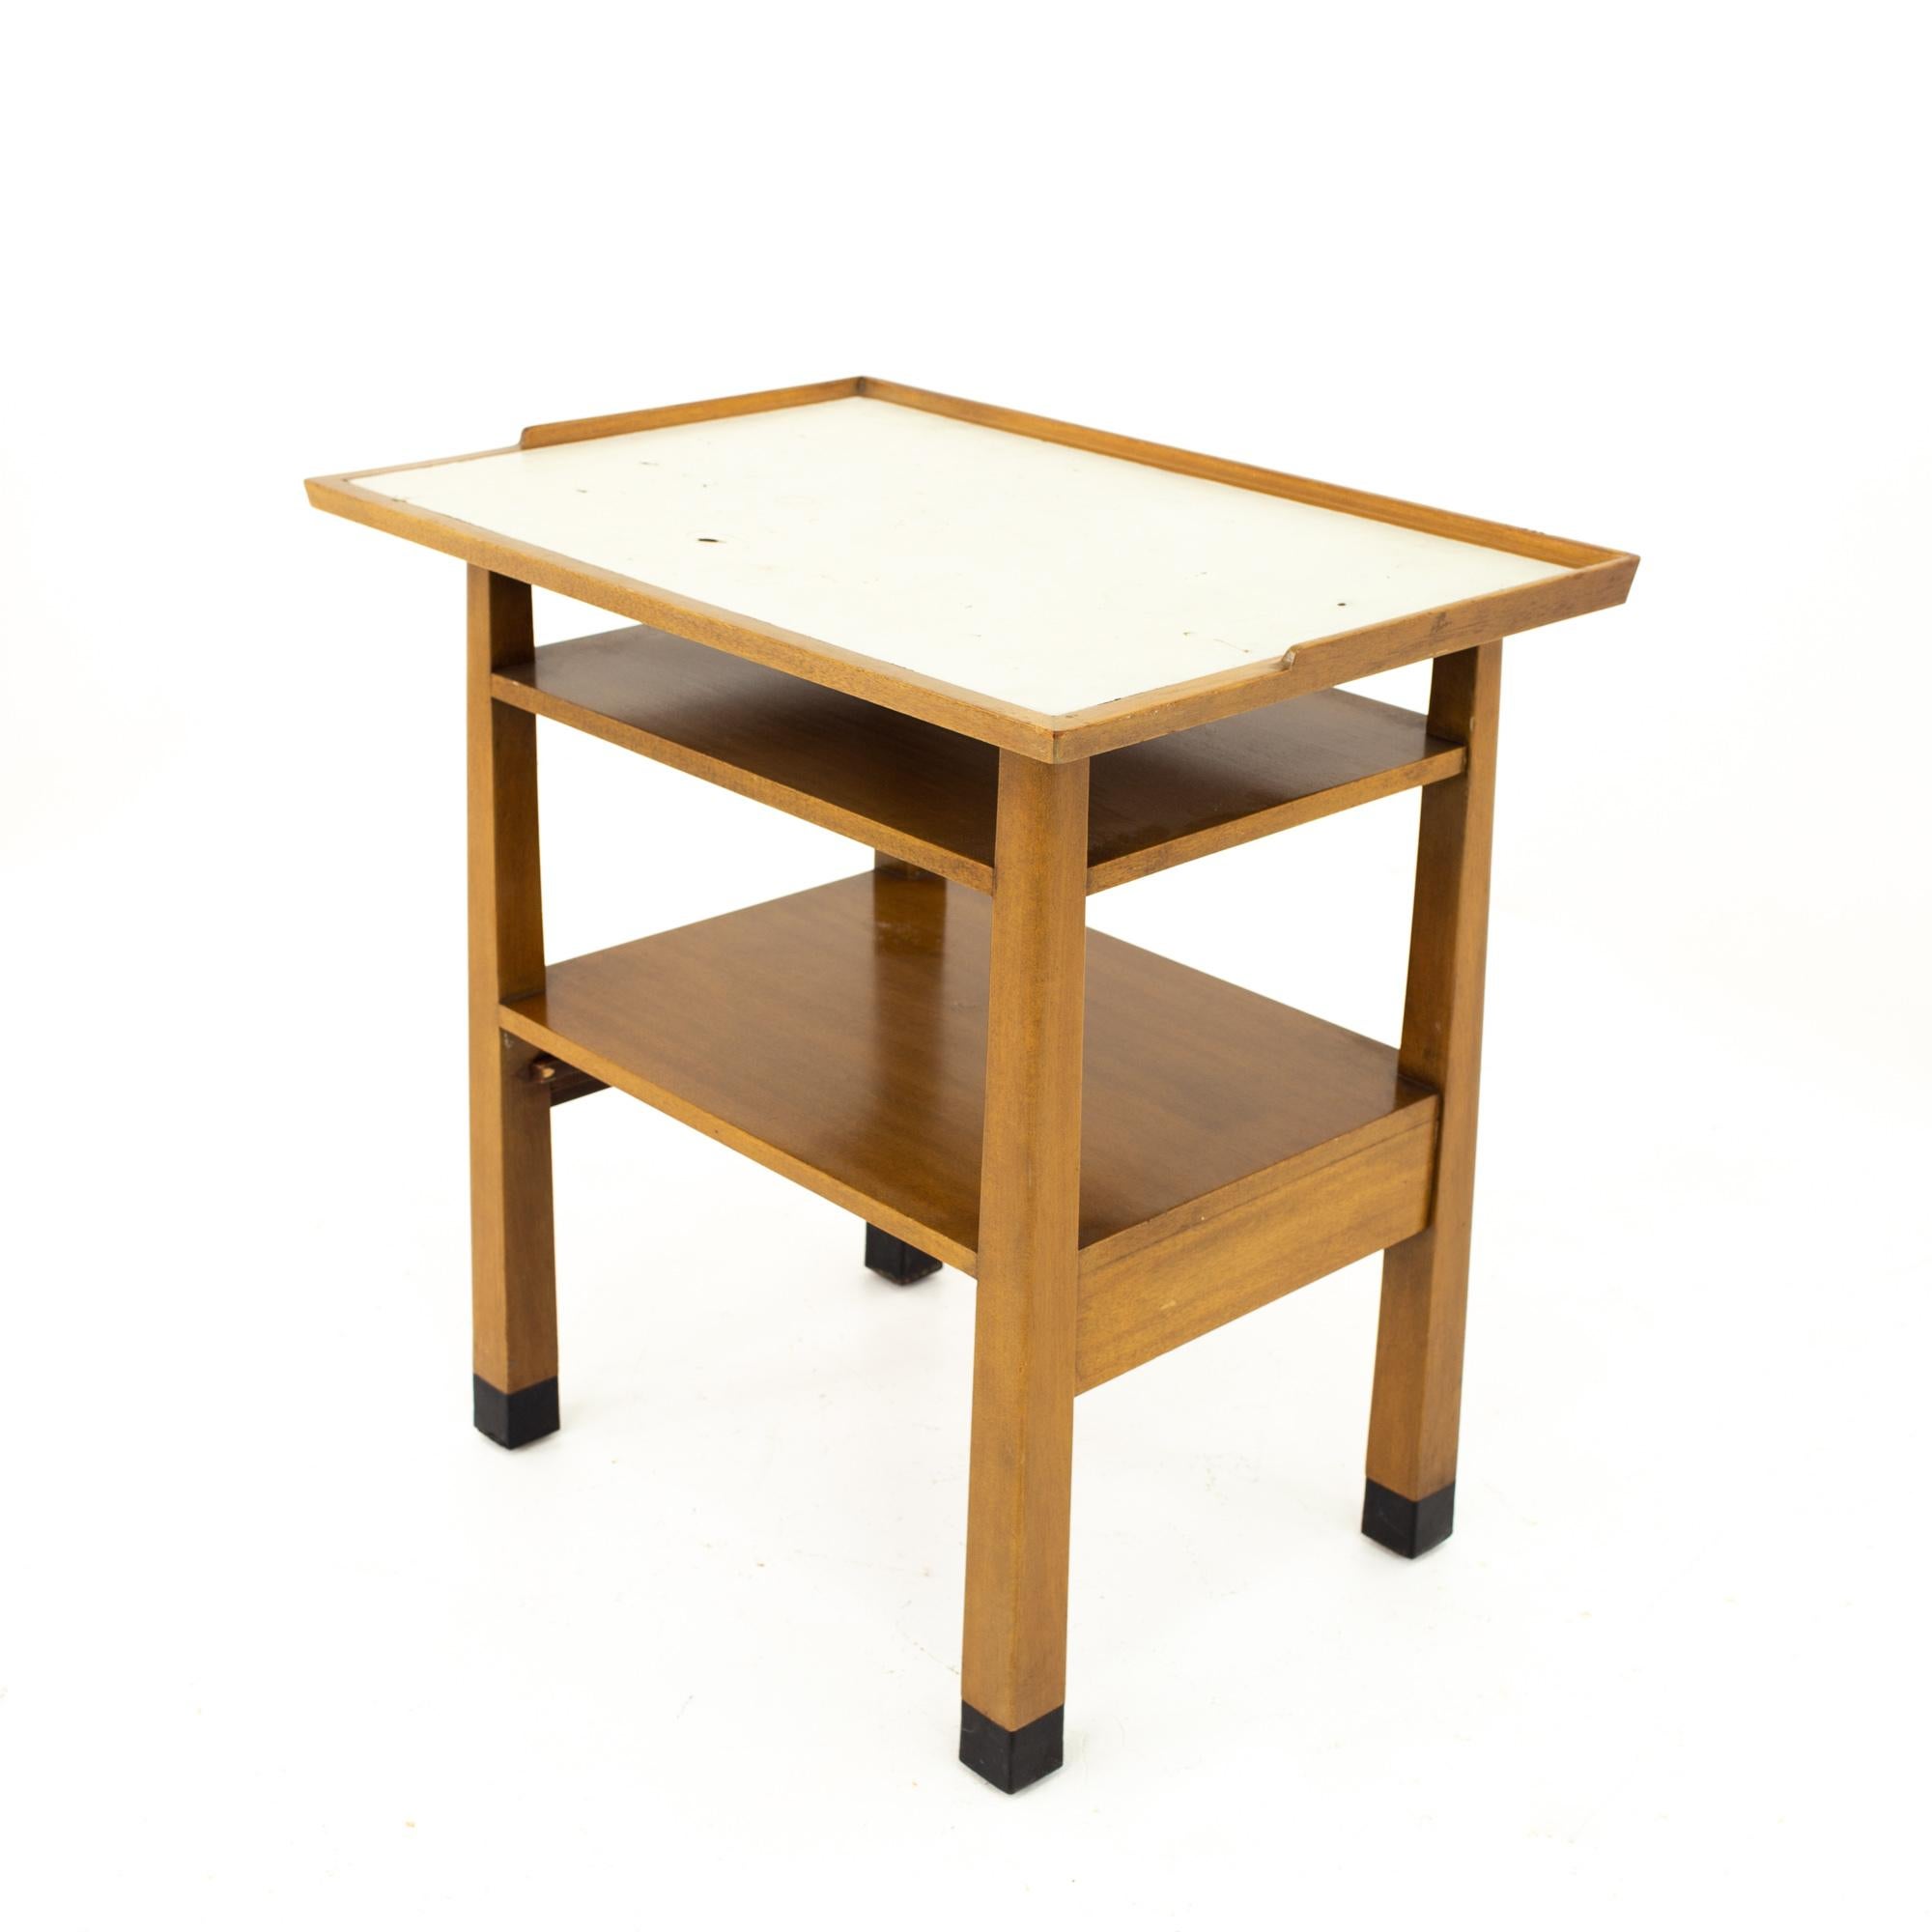 Dunbar Mid Century walnut and white laminate side end table
Table measures: 26 wide x 18 deep x 27 high

All pieces of furniture can be had in what we call restored vintage condition. That means the piece is restored upon purchase so it’s free of